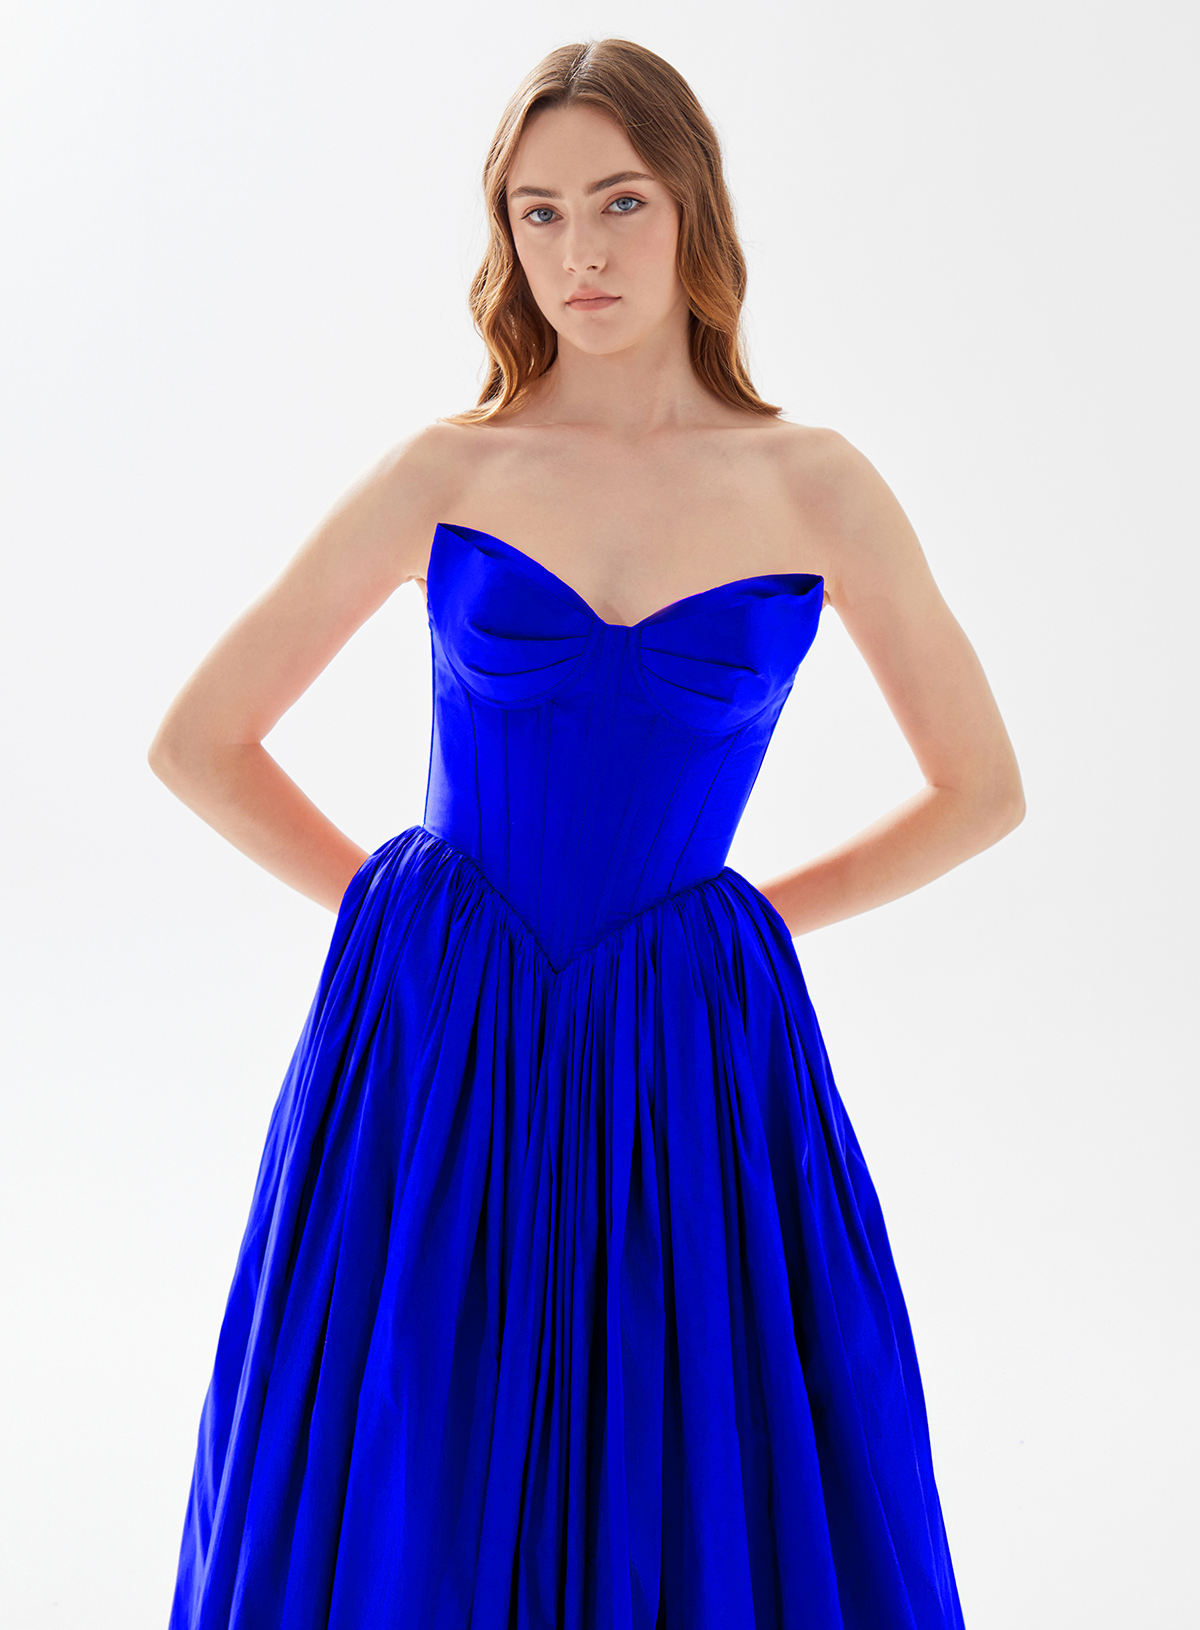 Picture of ROYAL BLUE DRESS